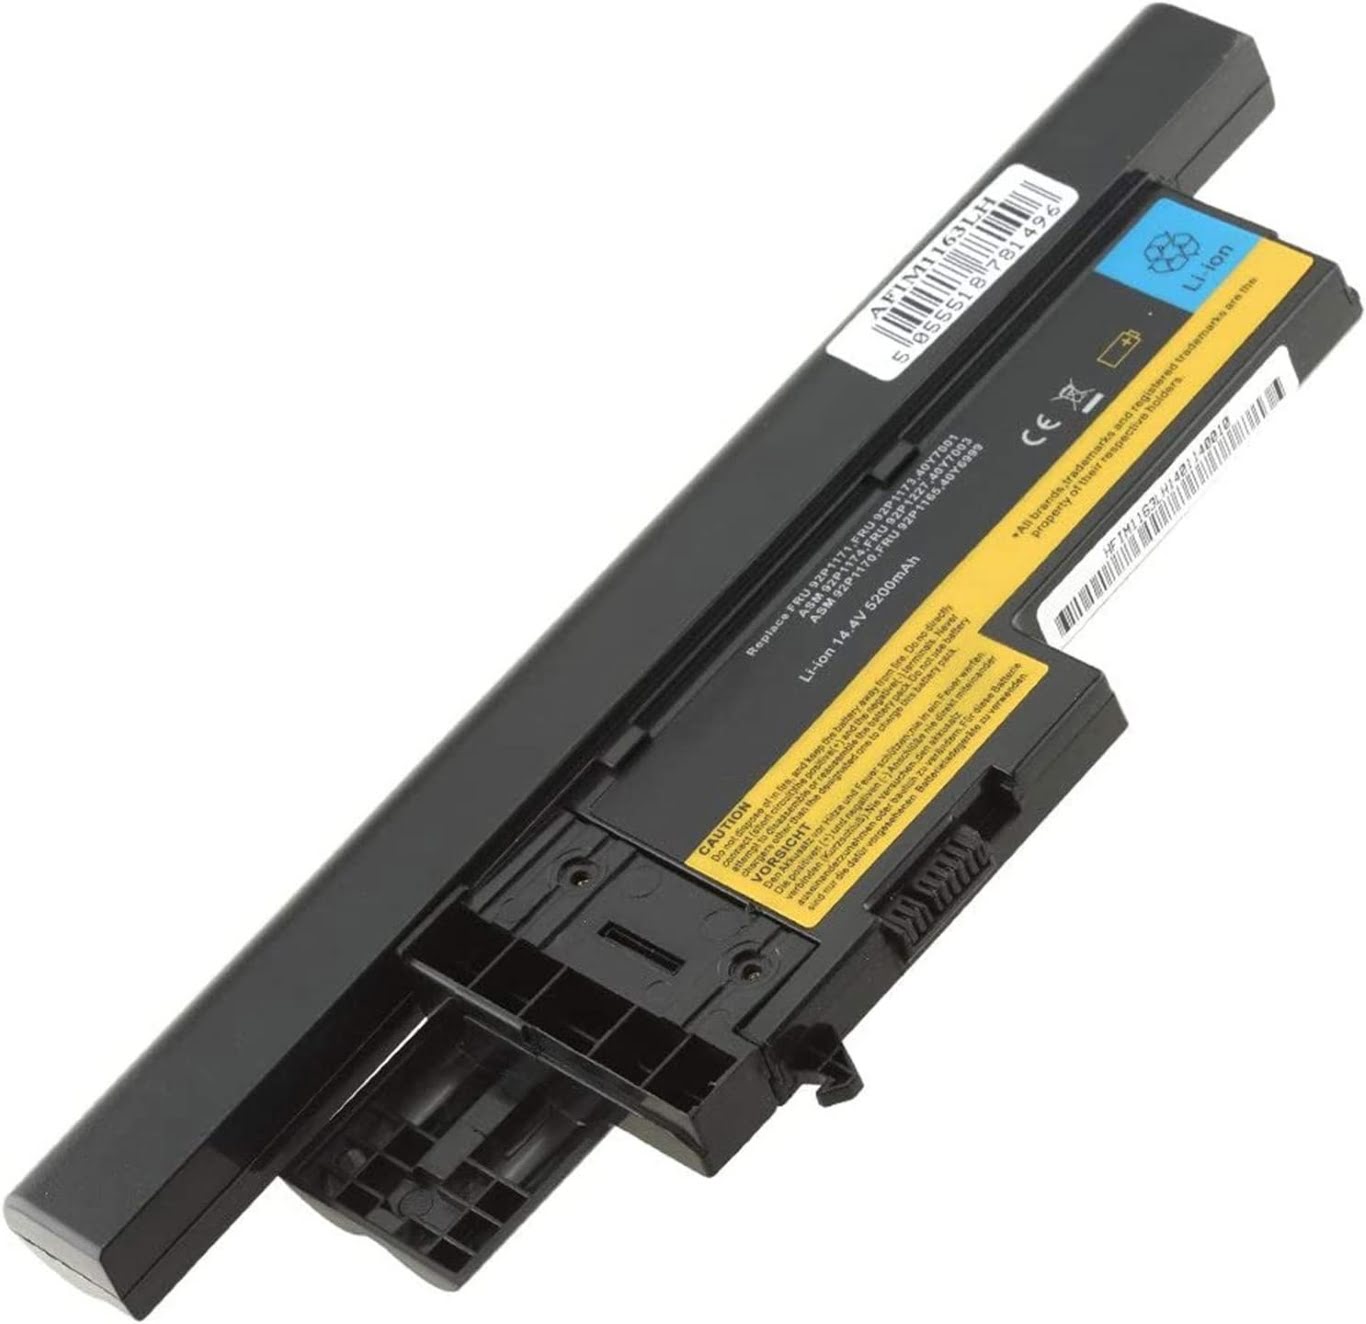 40Y6999, 40Y7001 replacement Laptop Battery for Lenovo ThinkPad X61, ThinkPad X61s, 8 cells, 14.4V, 4400mah /65wh